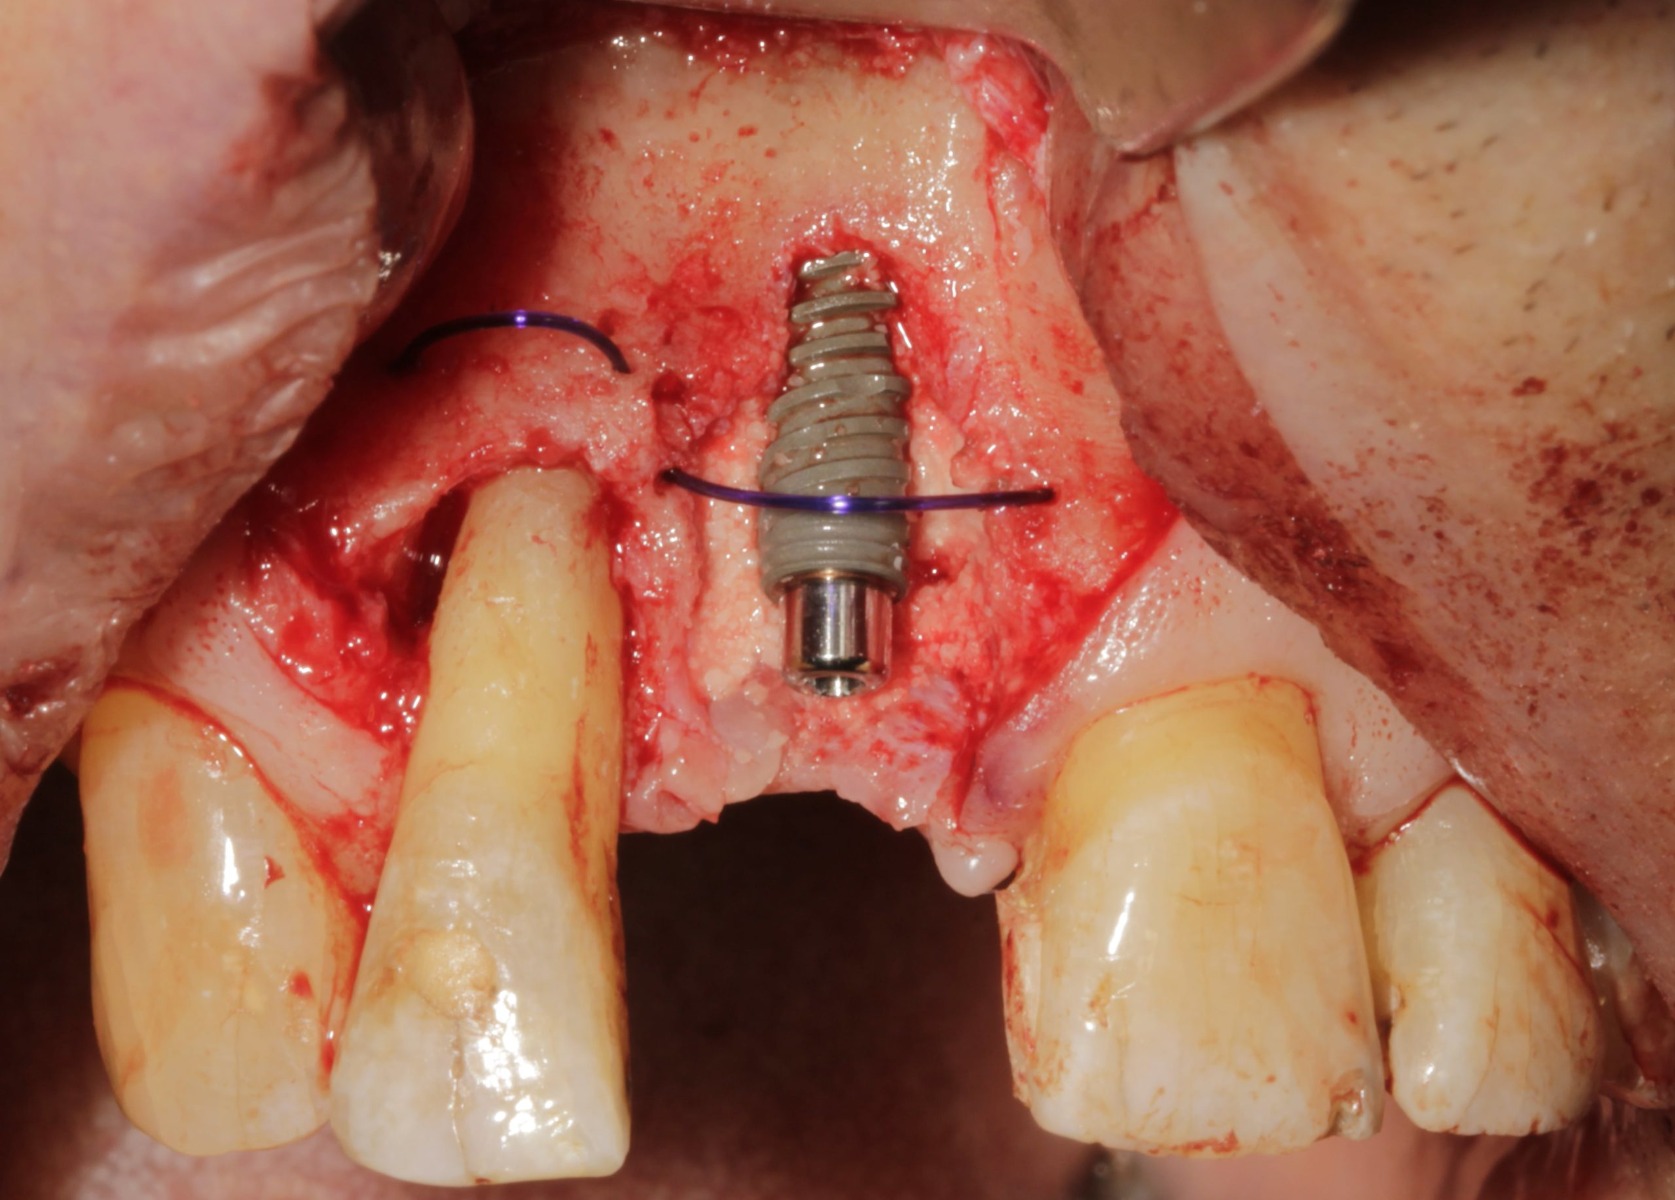 Placement of 2-0 PDS tenting sutures to create “dome device”